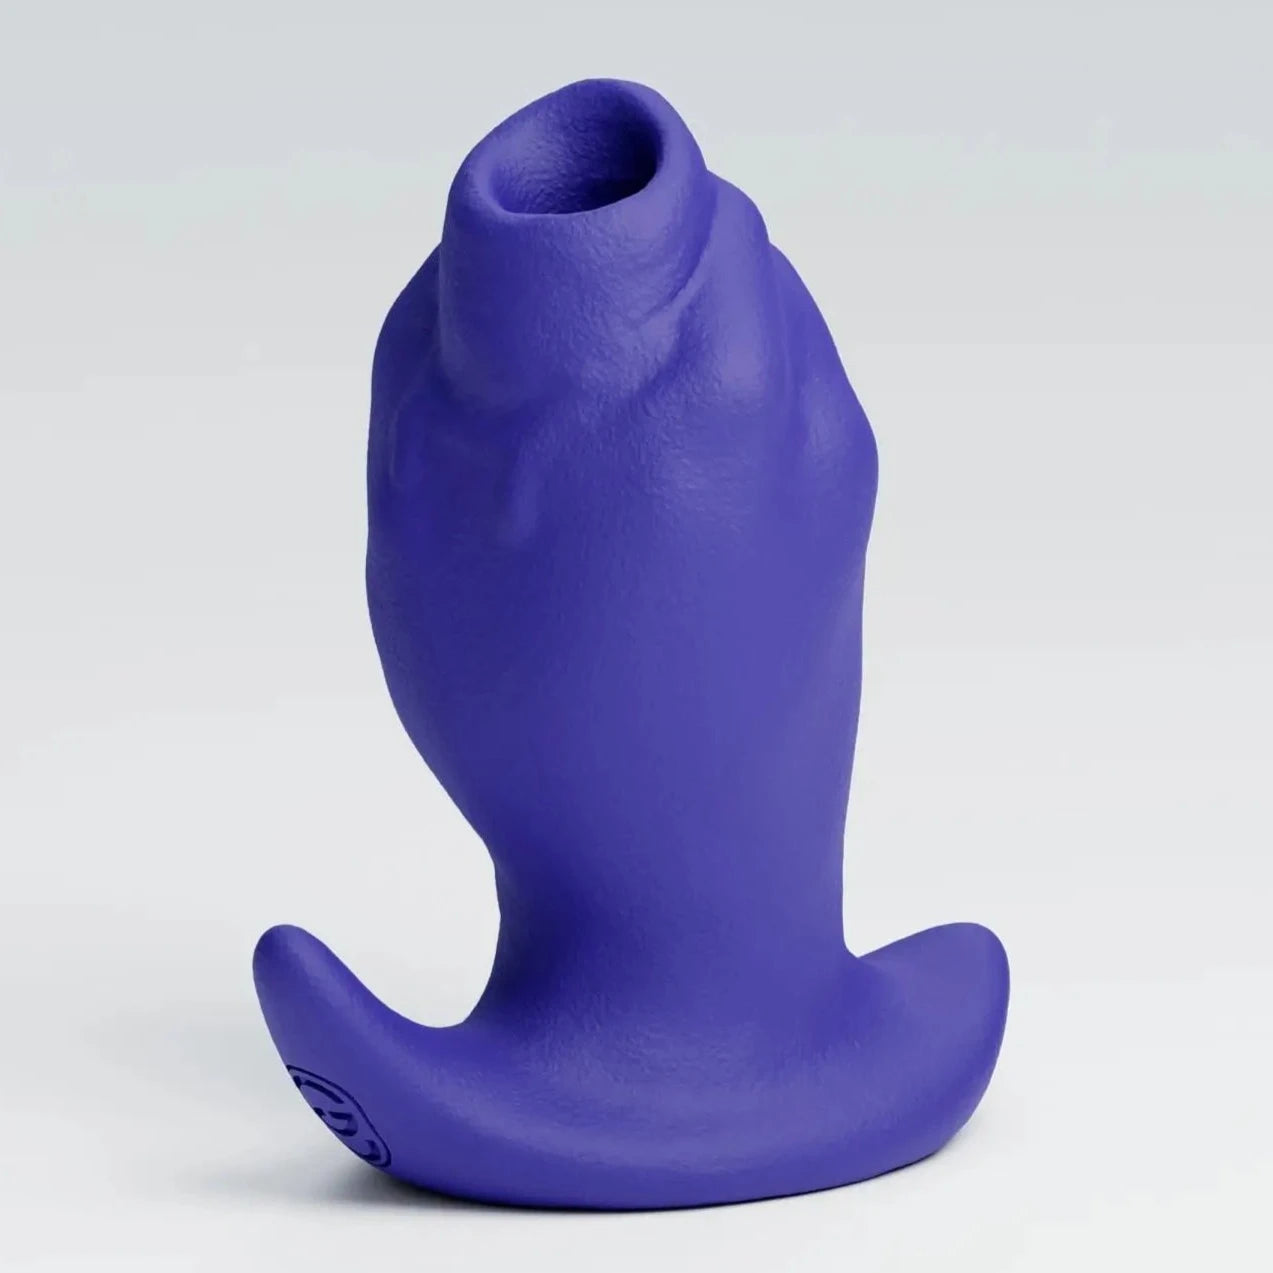 buttplug for fisting,punch anal plug,hollow butt plug blue color